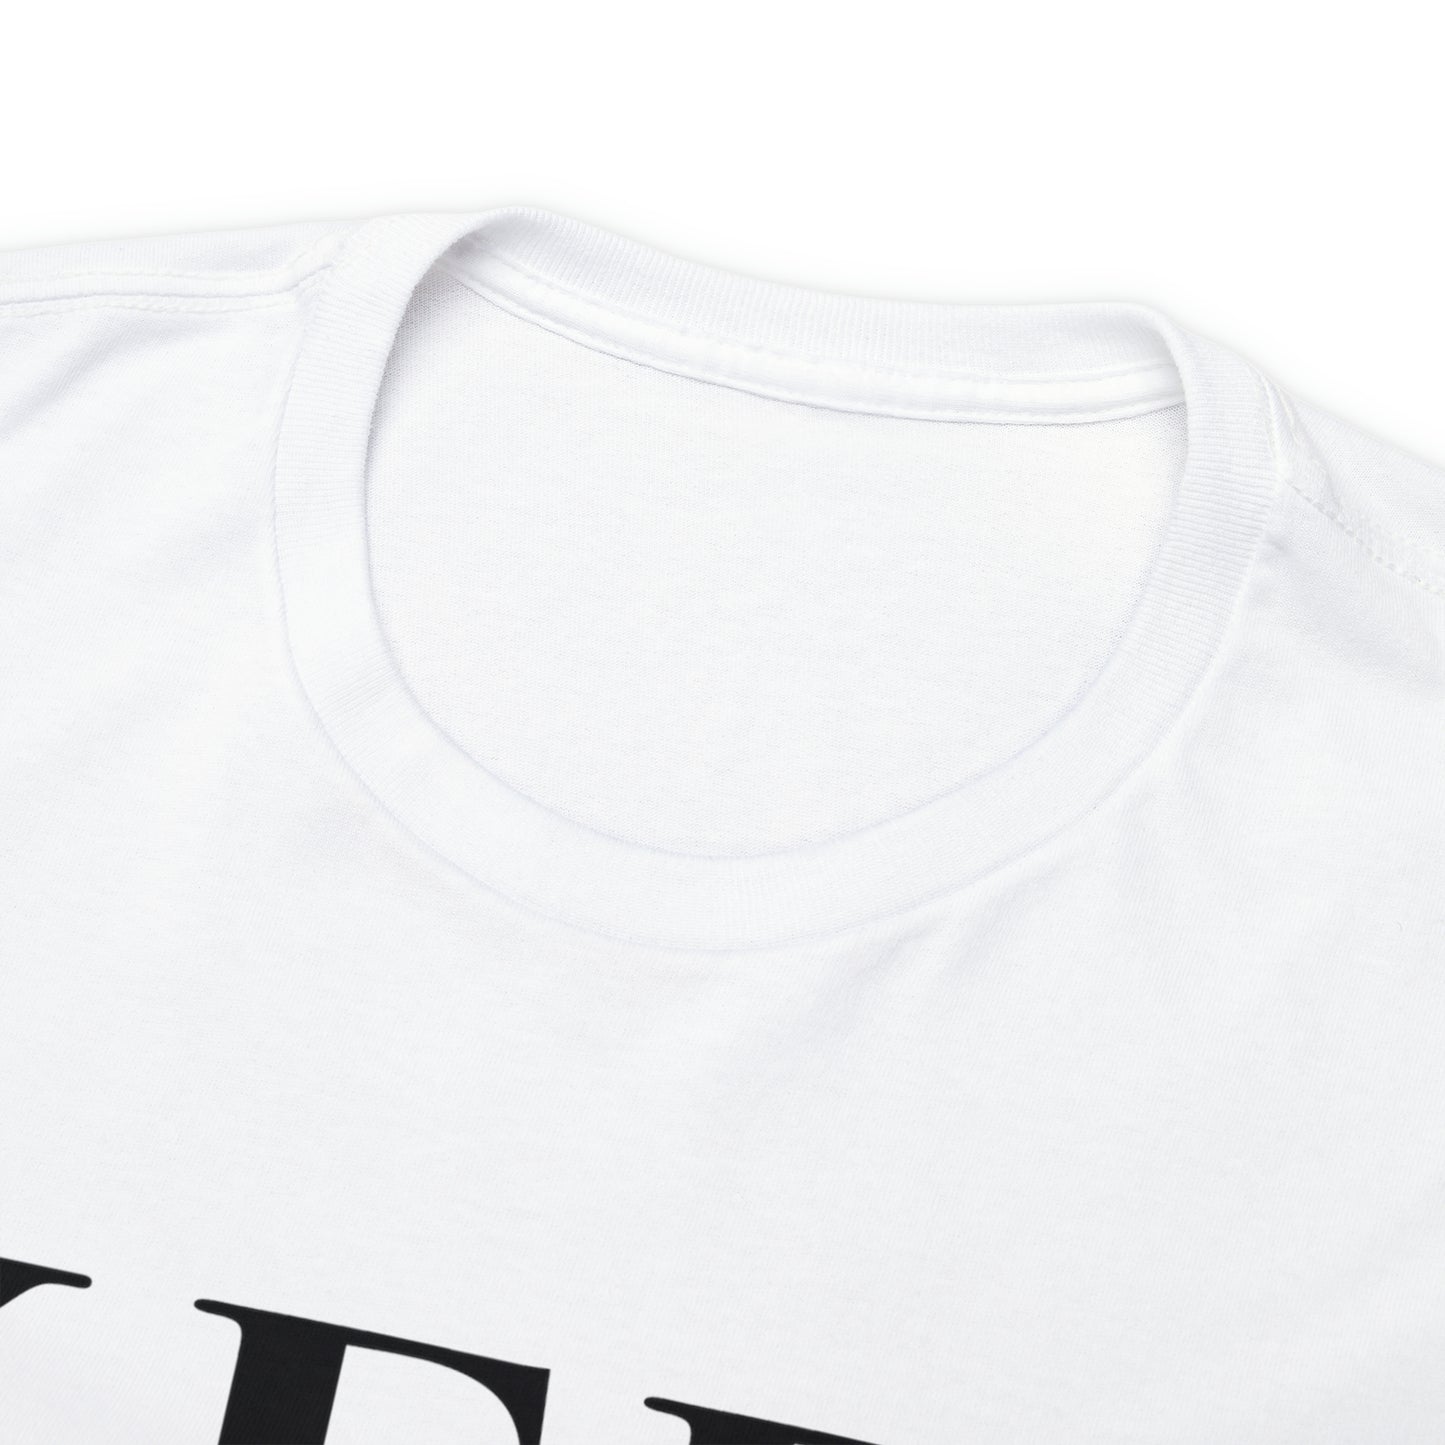 Keep God First - Believer Tee (White)